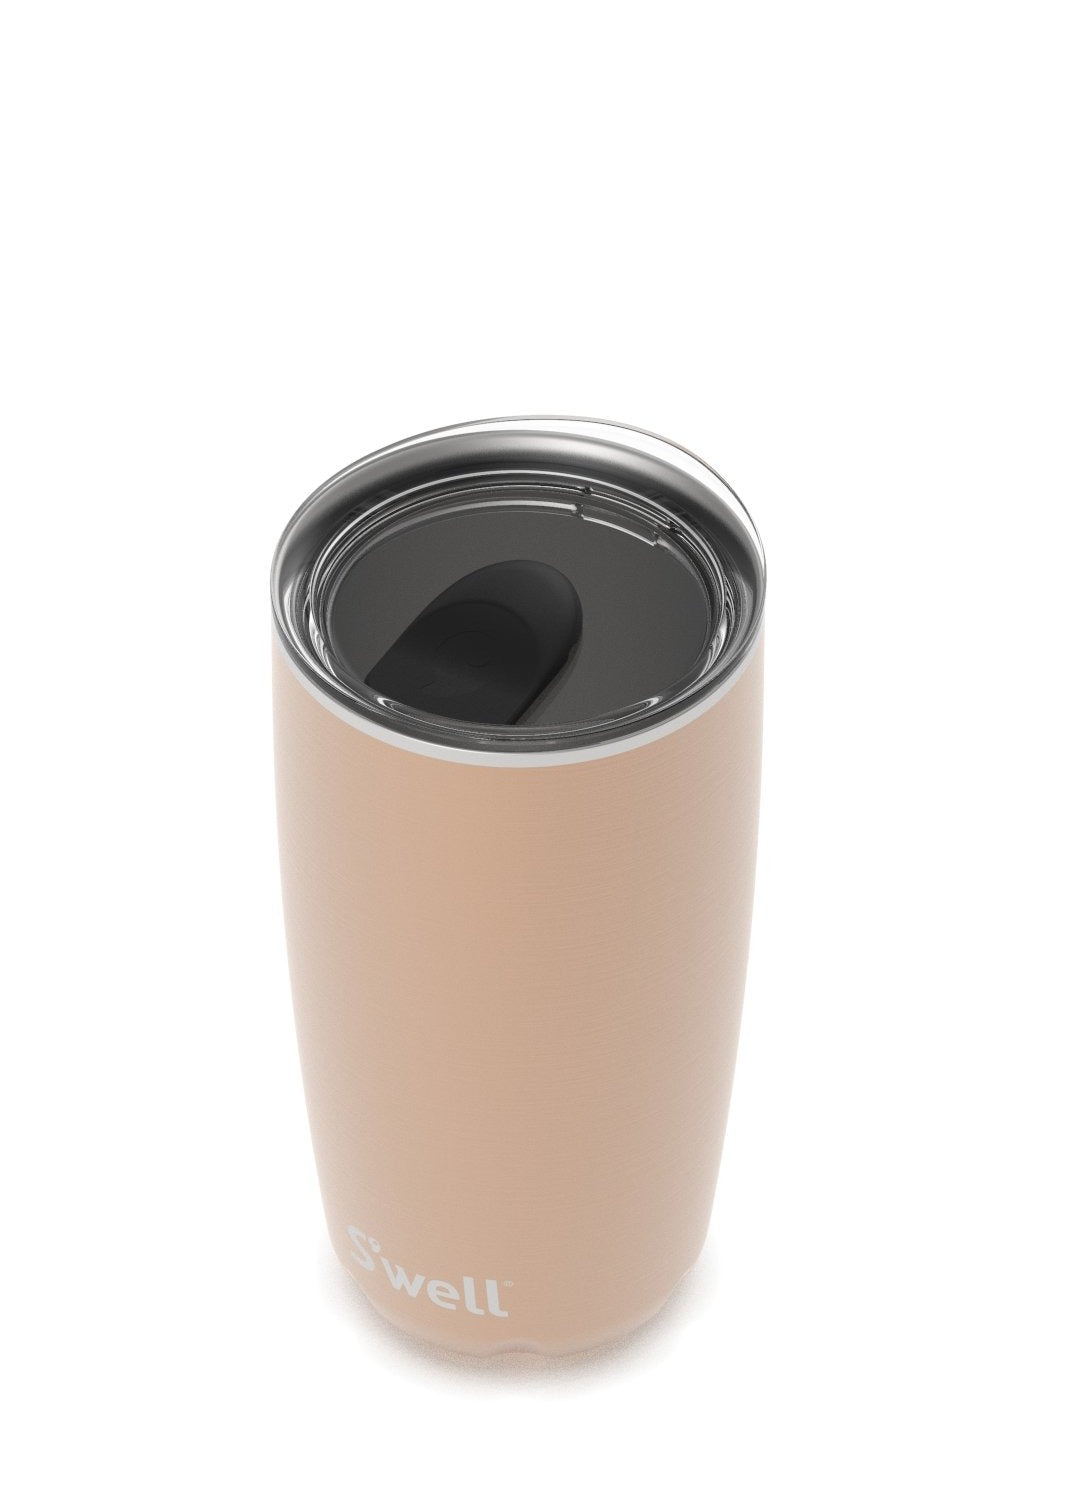 S'well Stainless Steel Pyrite Tumbler - FINAL SALE Home & Lifestyle